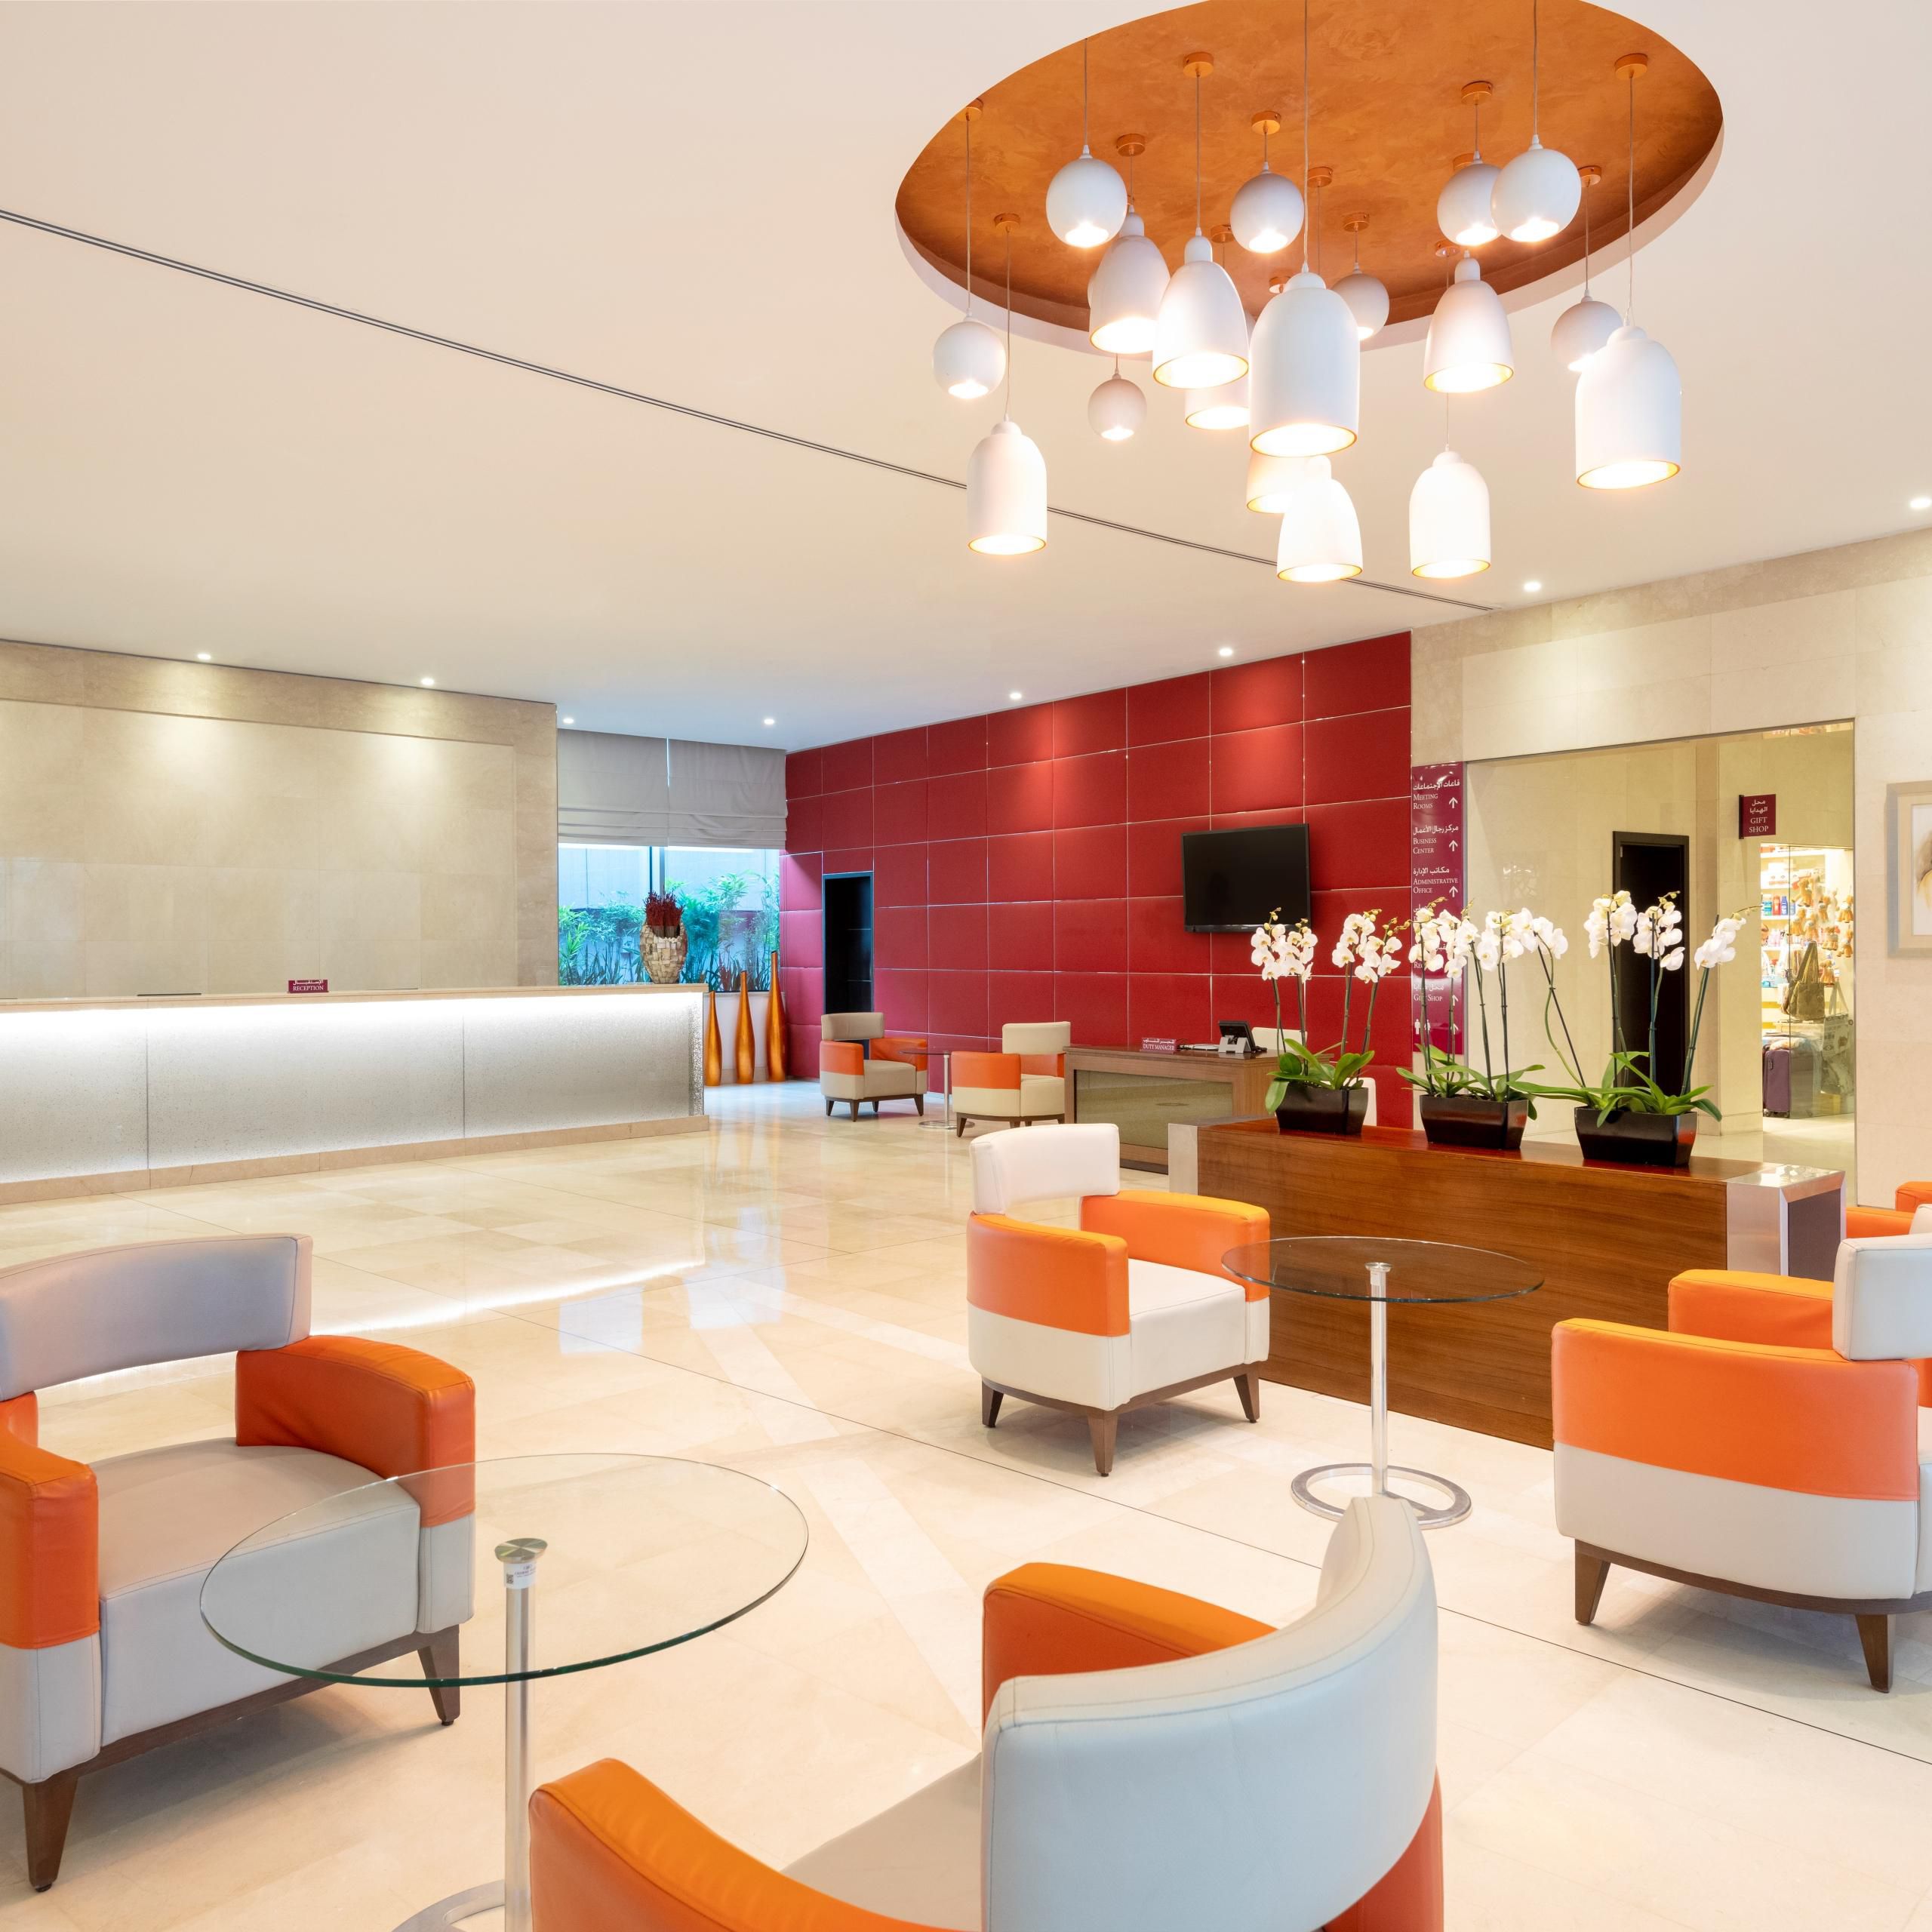 Our modern lobby entrance welcomes guests to the hotel